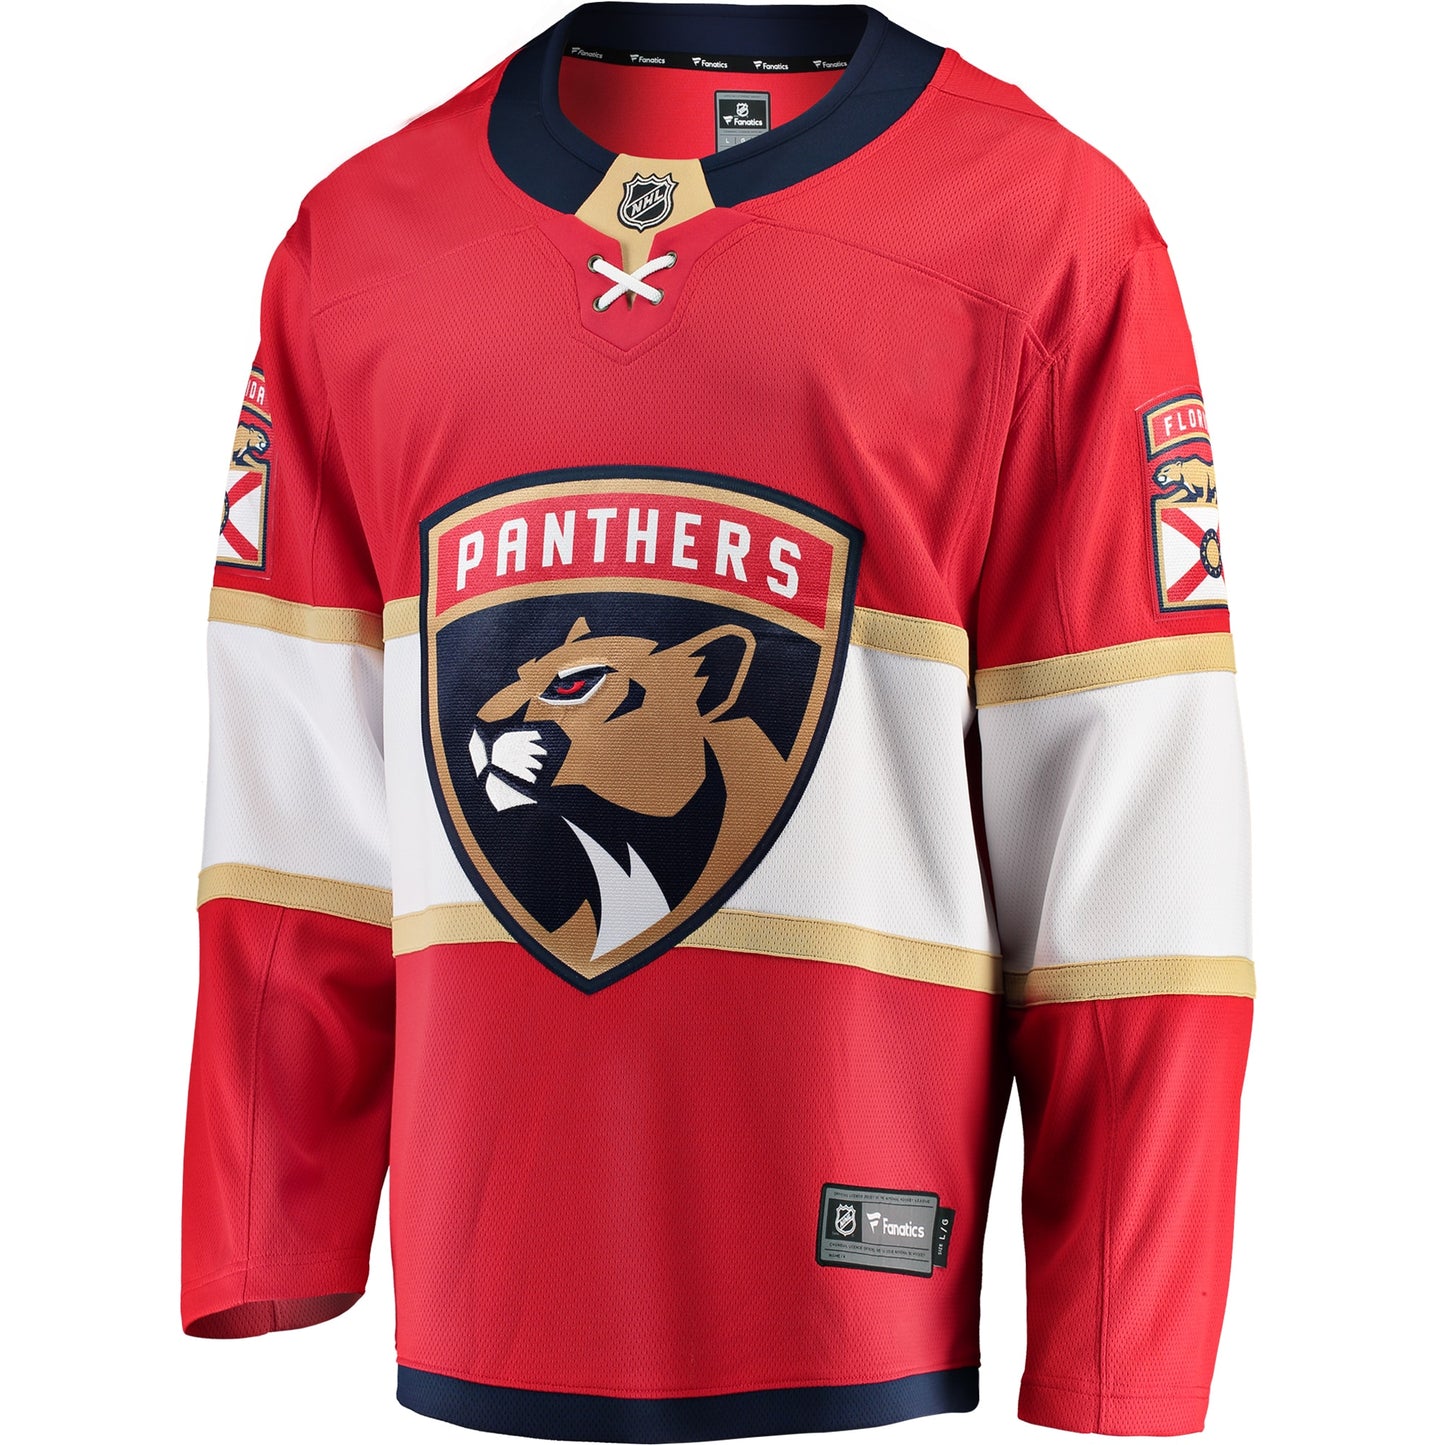 Florida Panthers Fanatics Branded Breakaway Home Jersey - Red